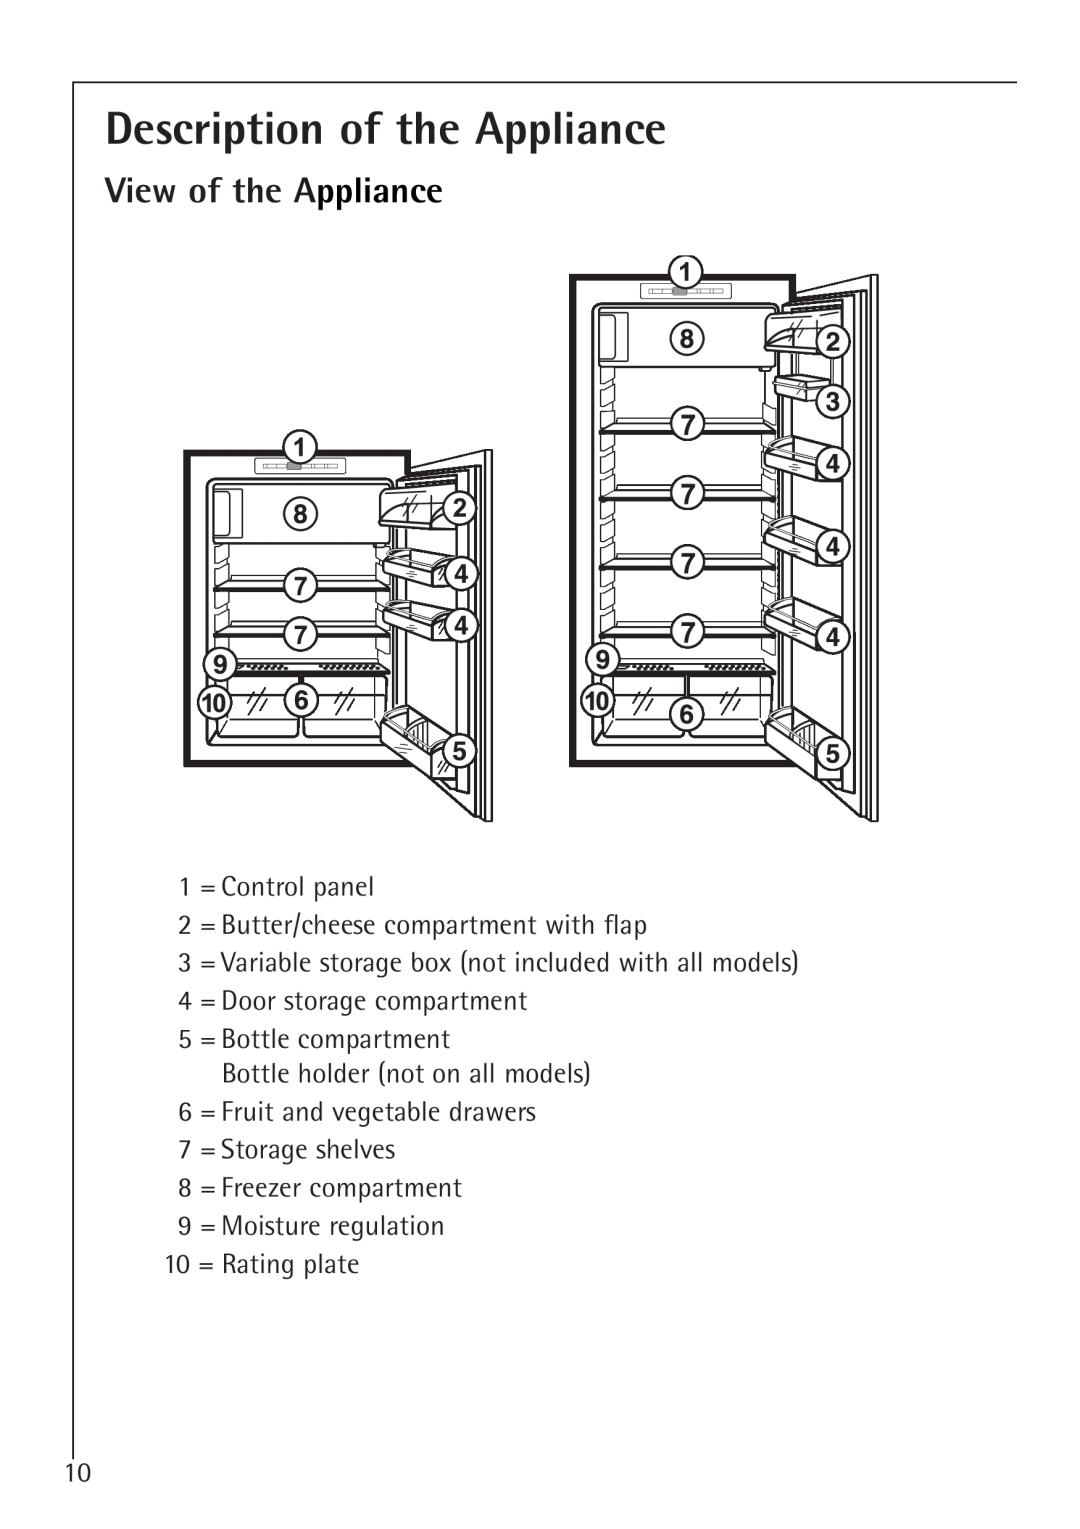 Electrolux K 98840-4 i, K 91240-4 i manual Description of the Appliance, View of the Appliance 